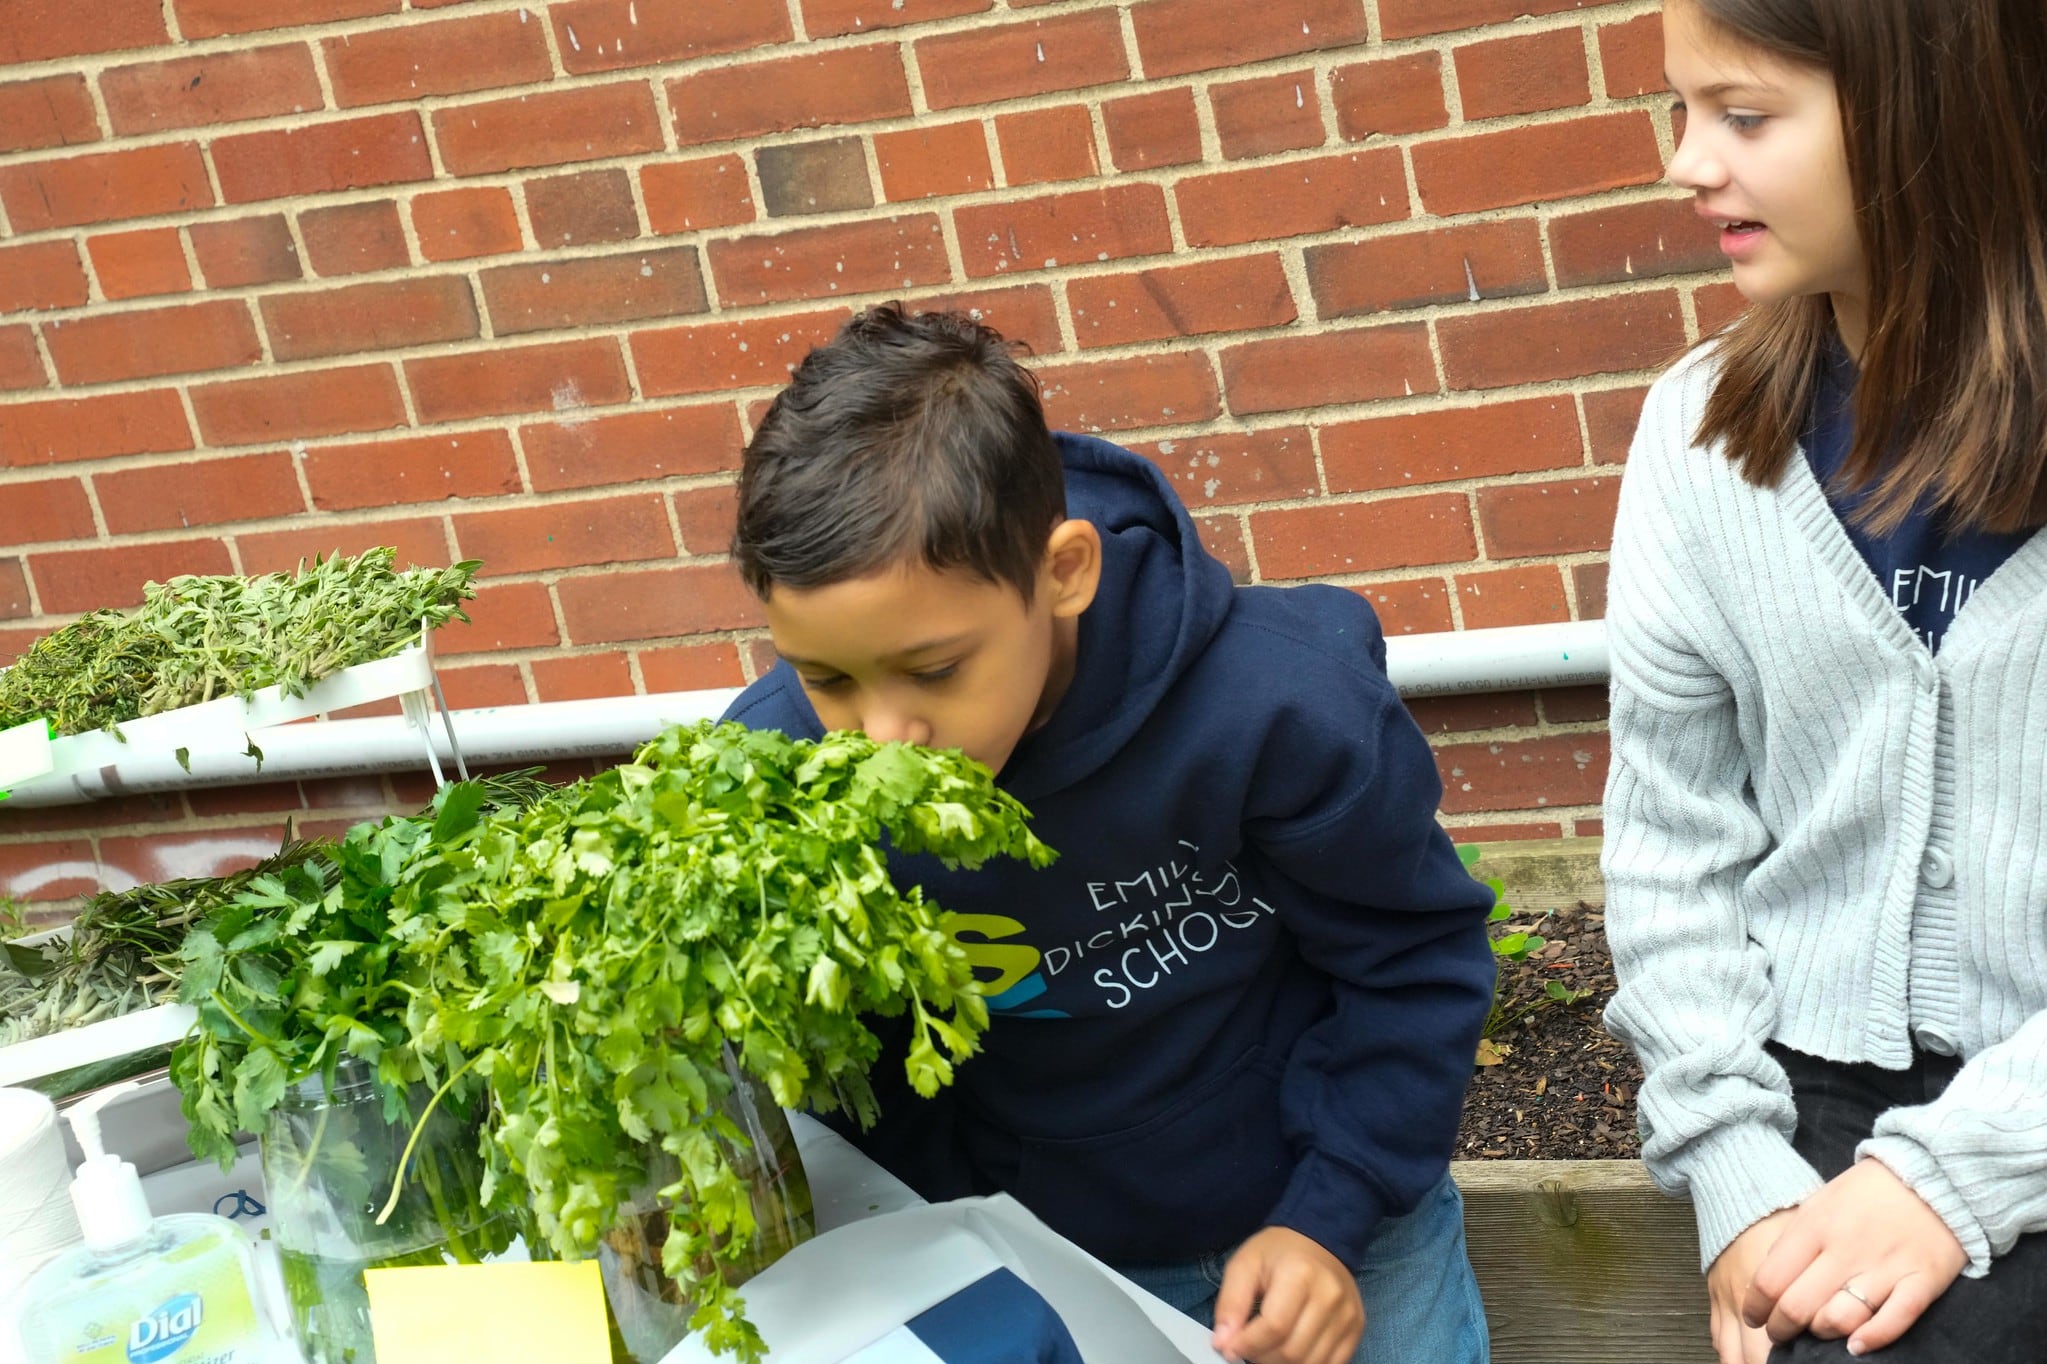 A boy wearing a blue sweatshirt smells herbs as a girl wearing a white sweater looks on. They are standing in front of a brick building.